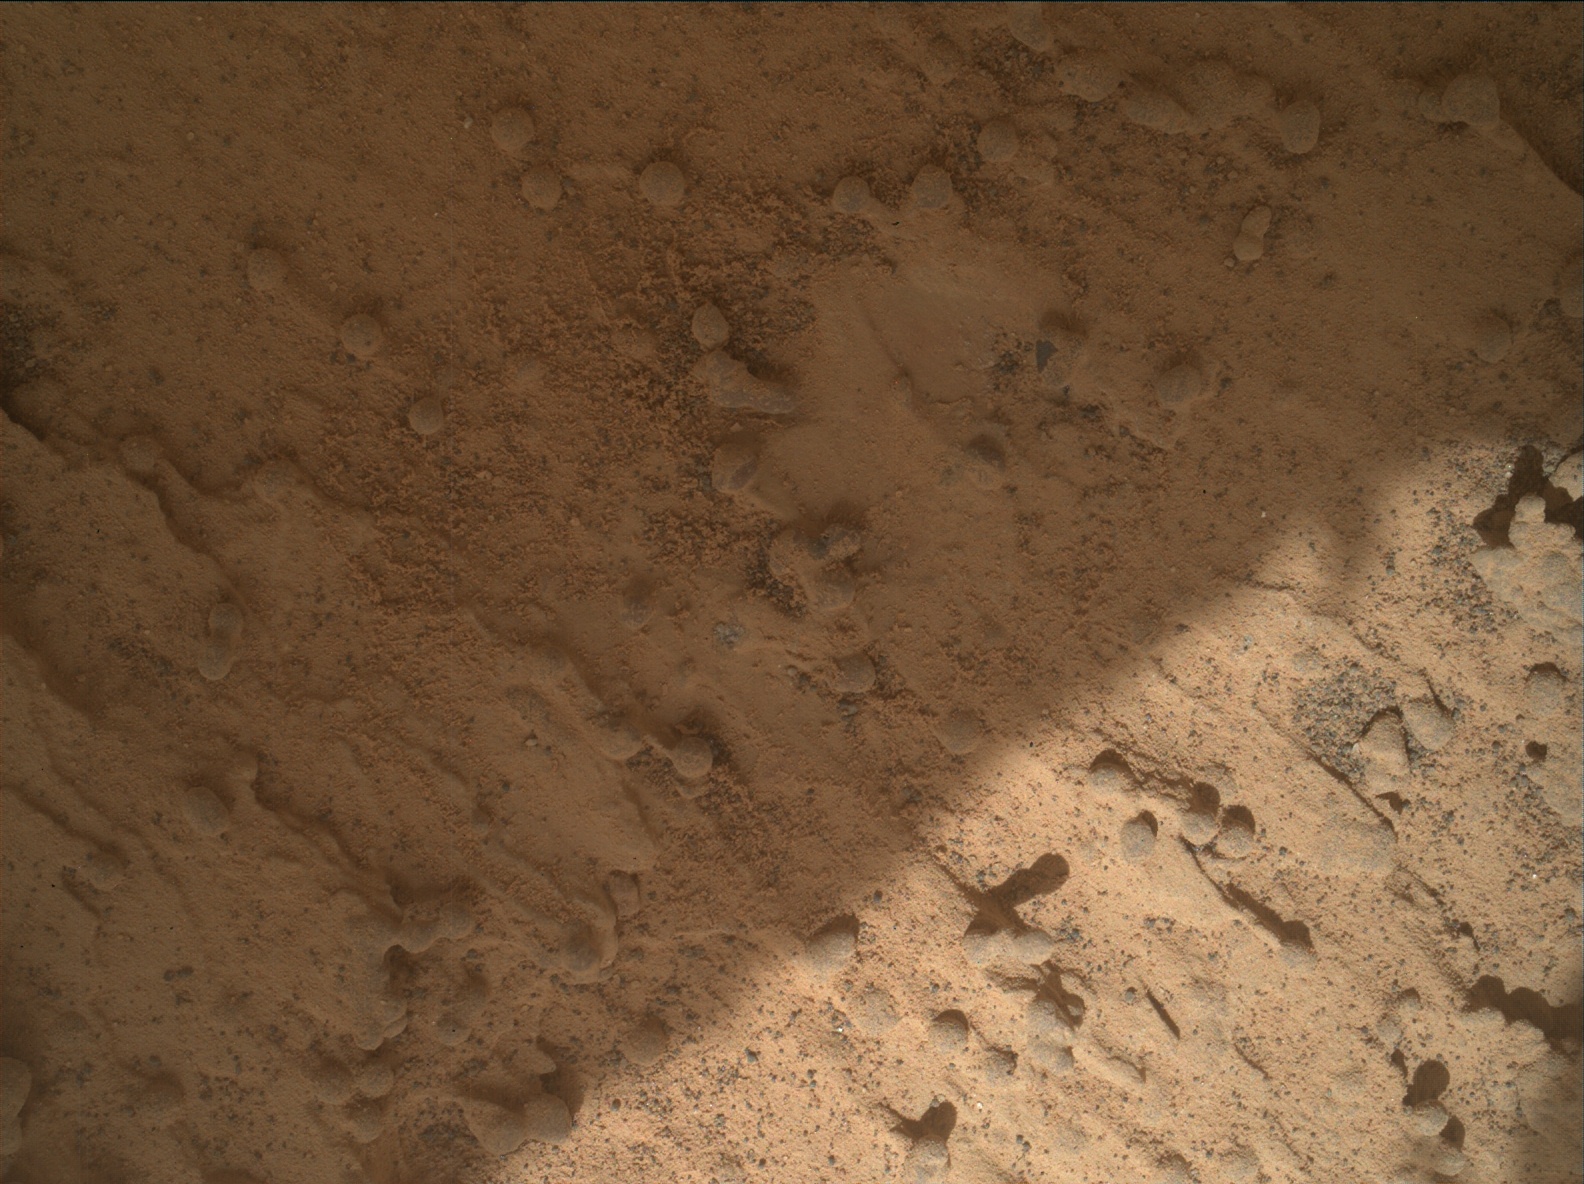 Nasa's Mars rover Curiosity acquired this image using its Mars Hand Lens Imager (MAHLI) on Sol 3553